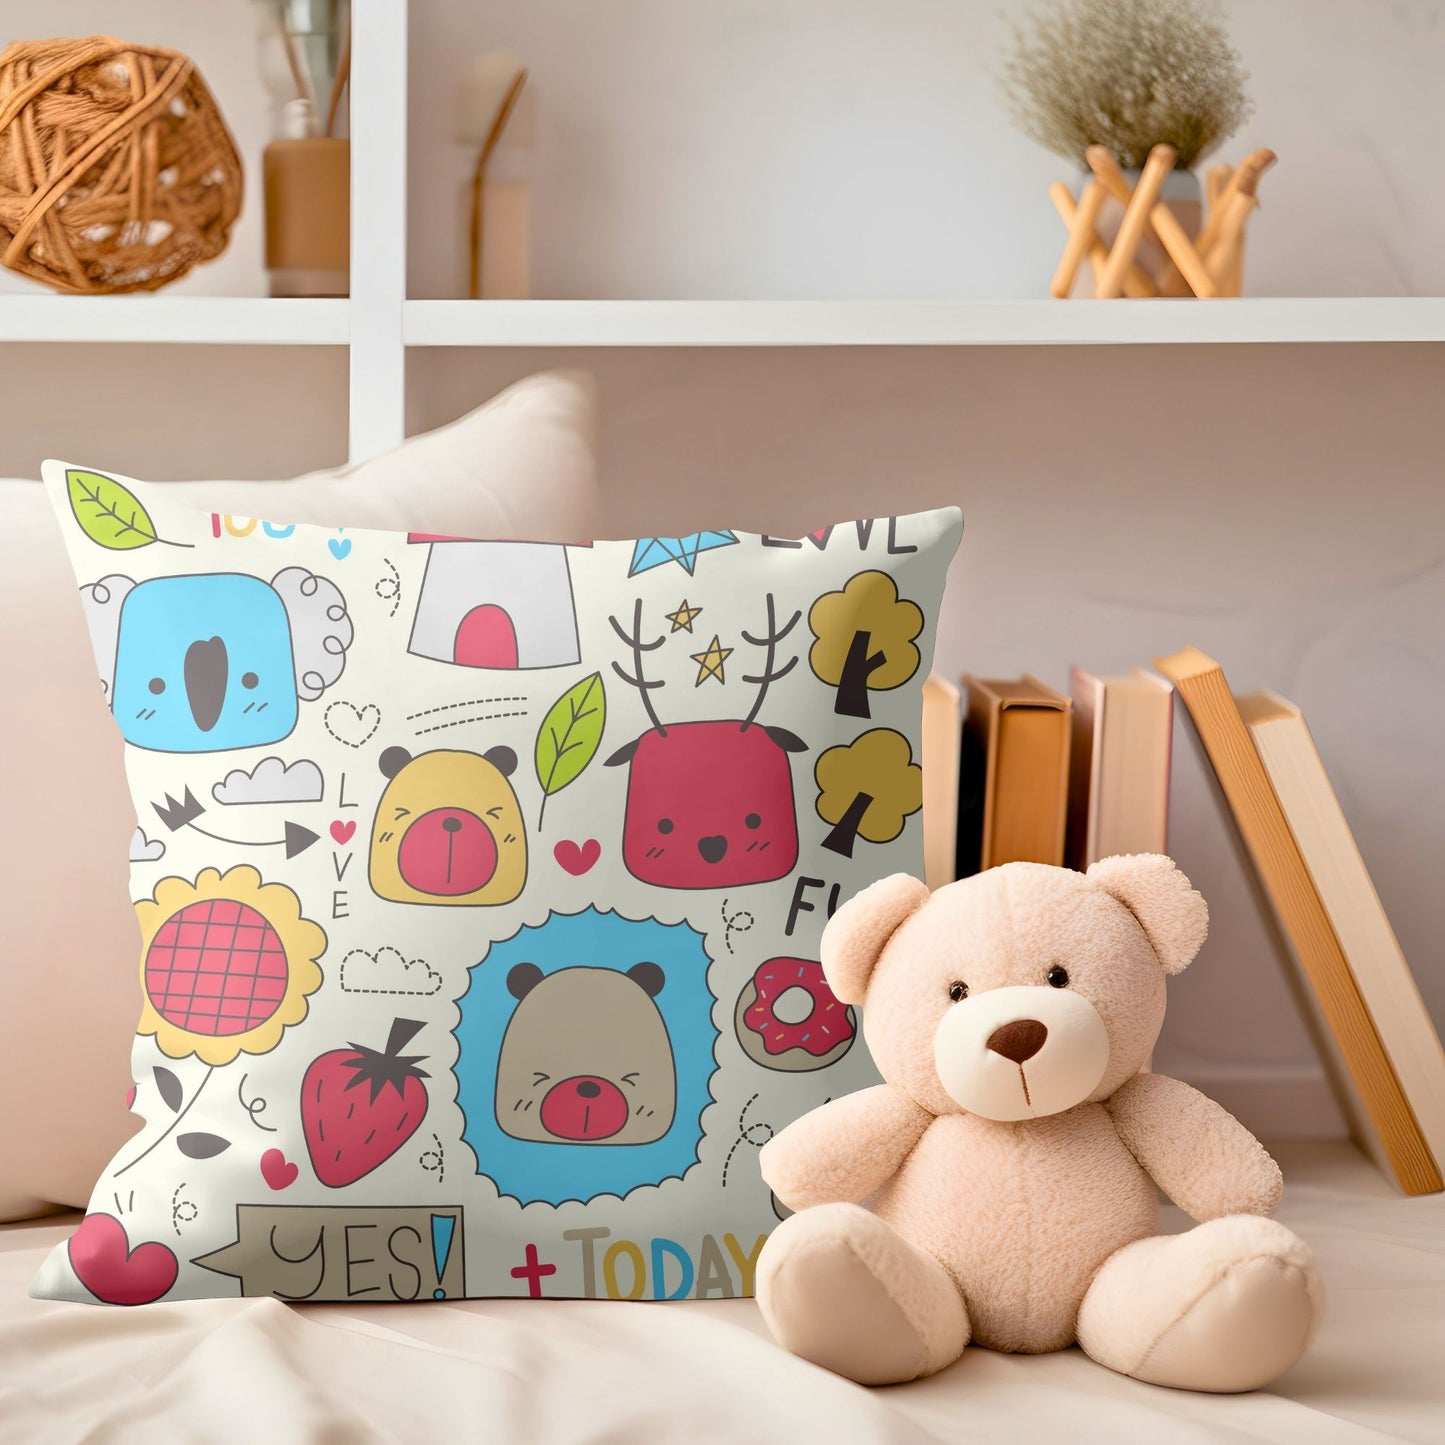 Soft pillow adorned with adorable animal prints for children's rooms.